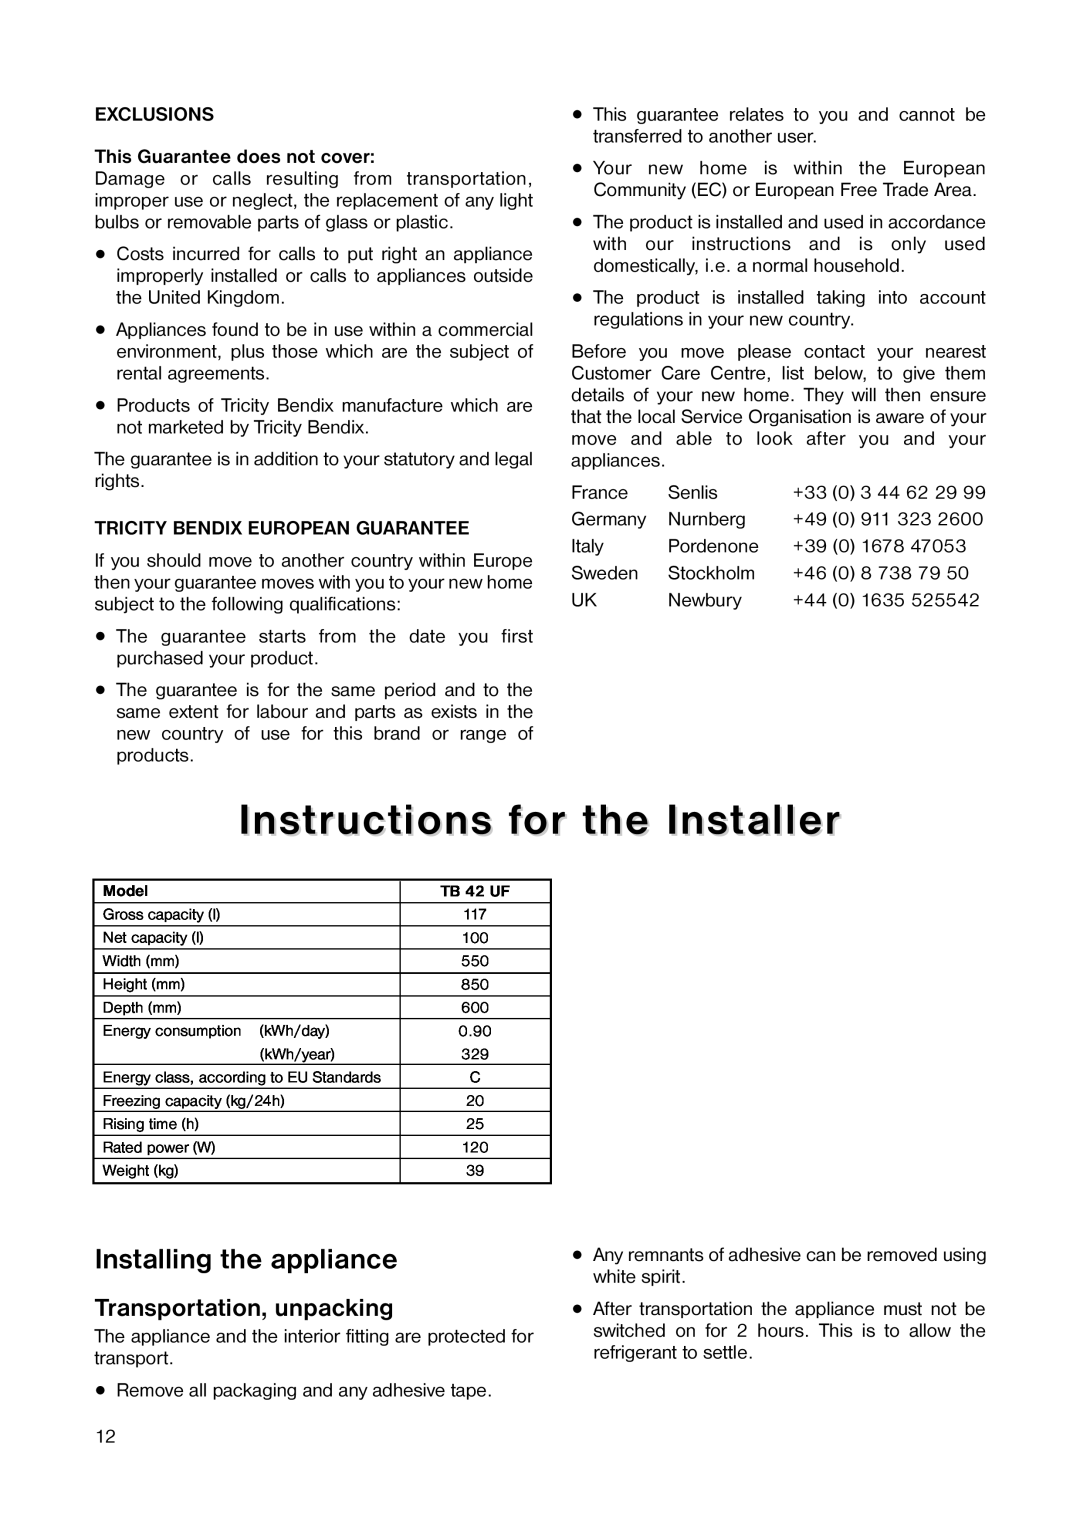 Tricity Bendix TB 42 UF Instructions for the Installer, Installing the appliance, Transportation, unpacking 